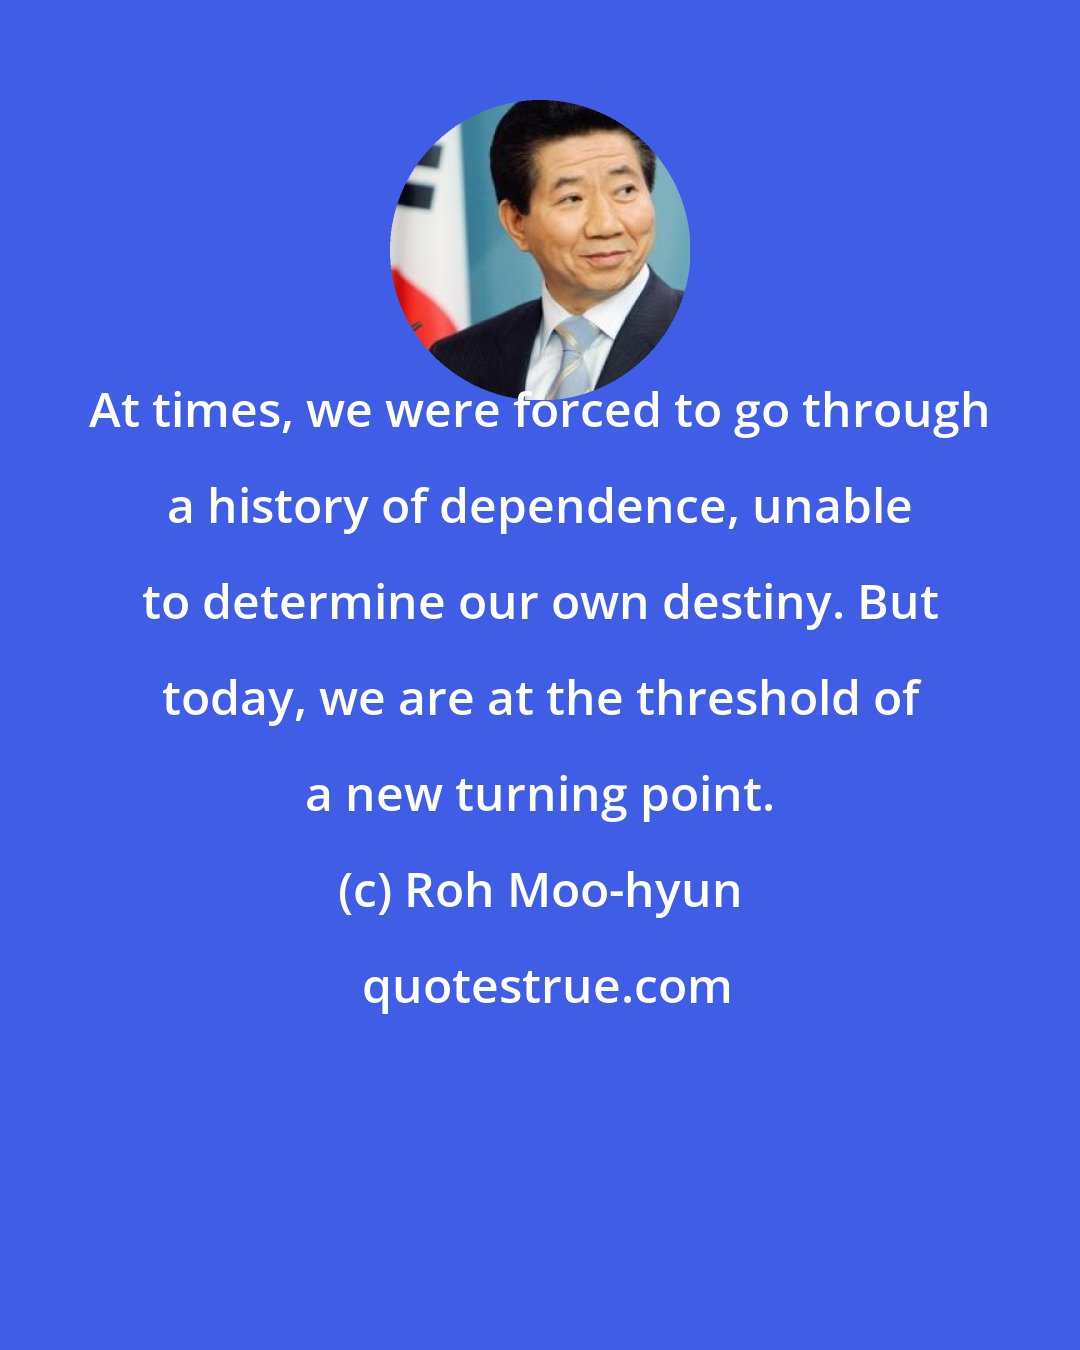 Roh Moo-hyun: At times, we were forced to go through a history of dependence, unable to determine our own destiny. But today, we are at the threshold of a new turning point.